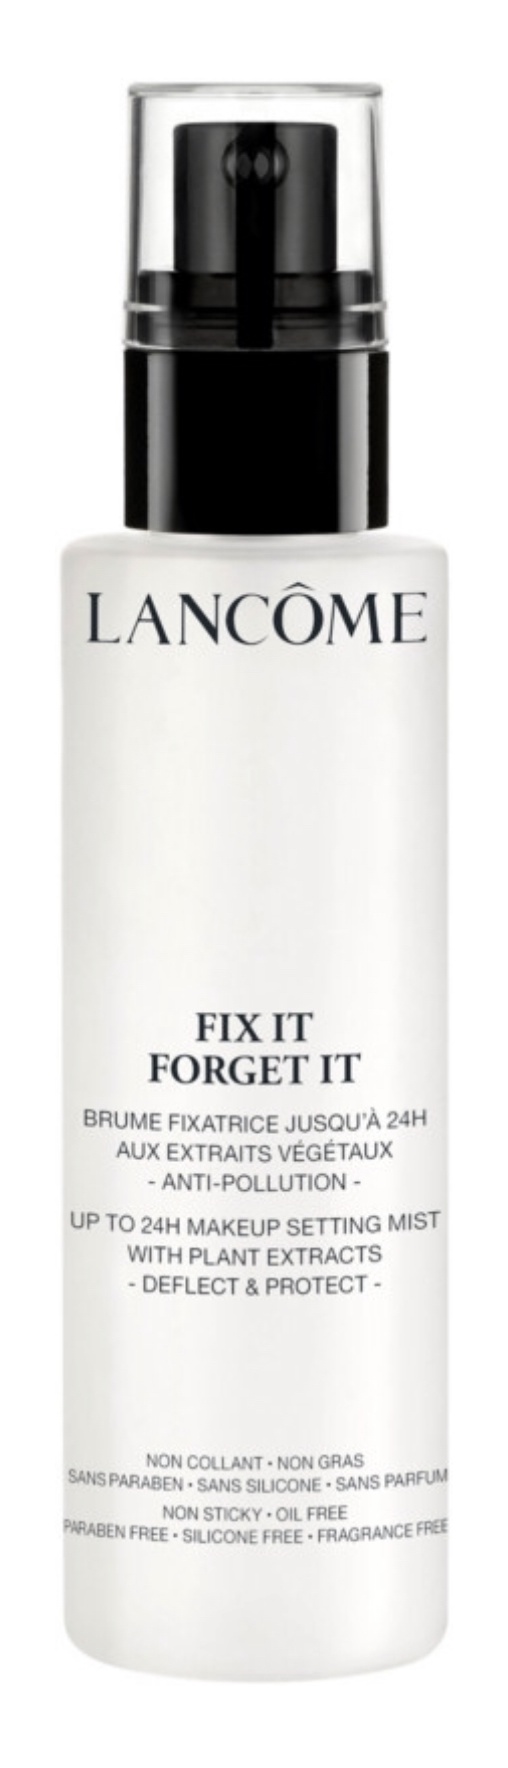 Lancôme Fix It And Forget It Setting Spray